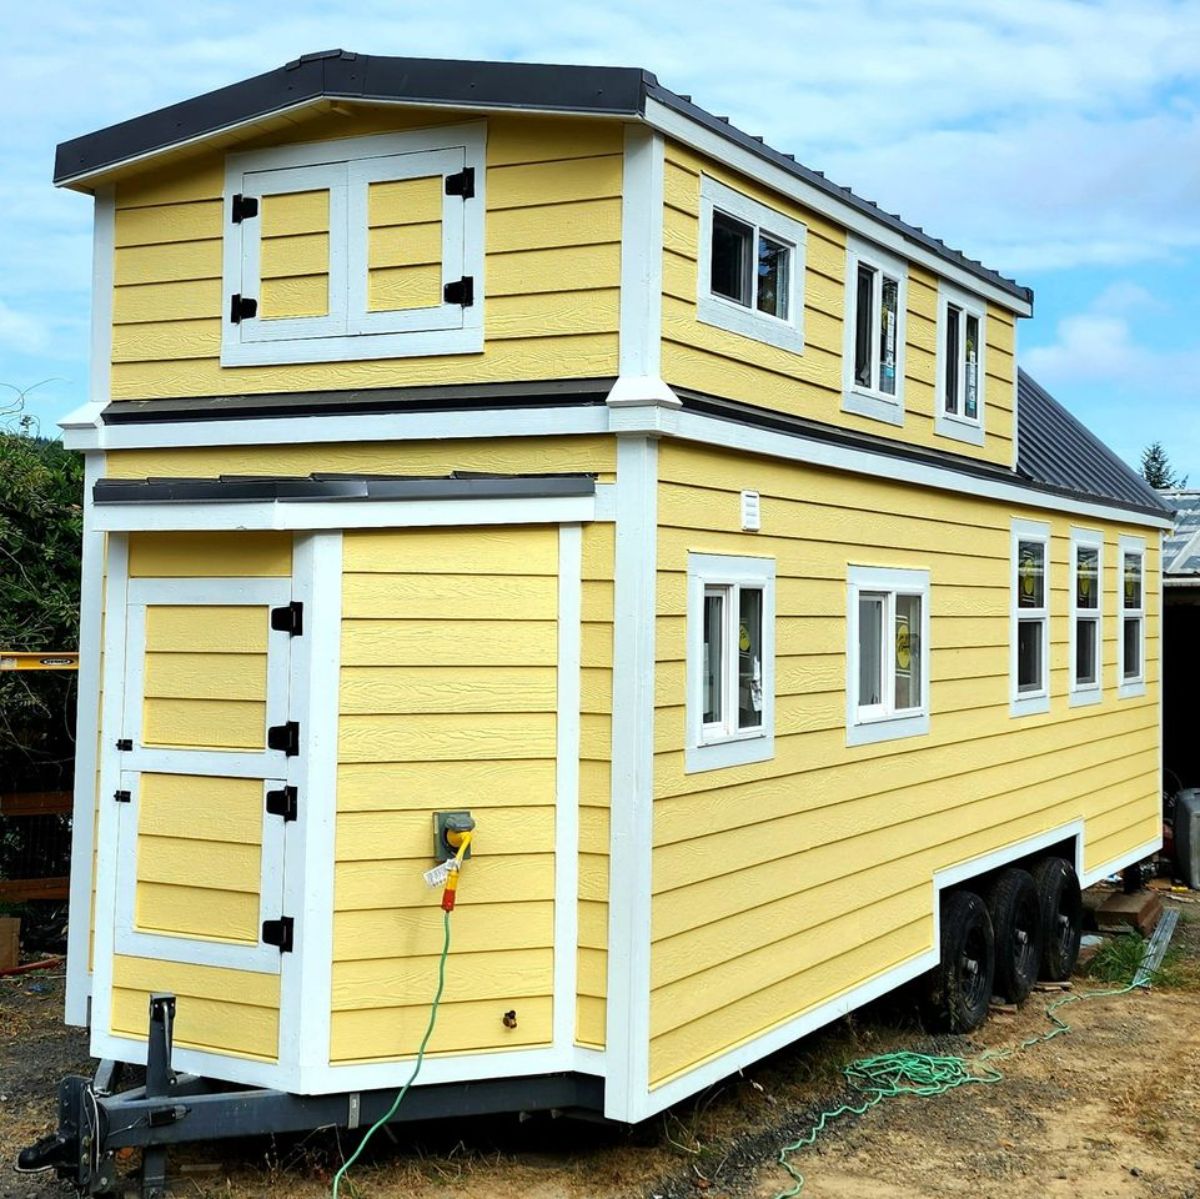 Amazing view of 28' Tiny House on Wheels Has a Spacious Bedroom + Storage Loft